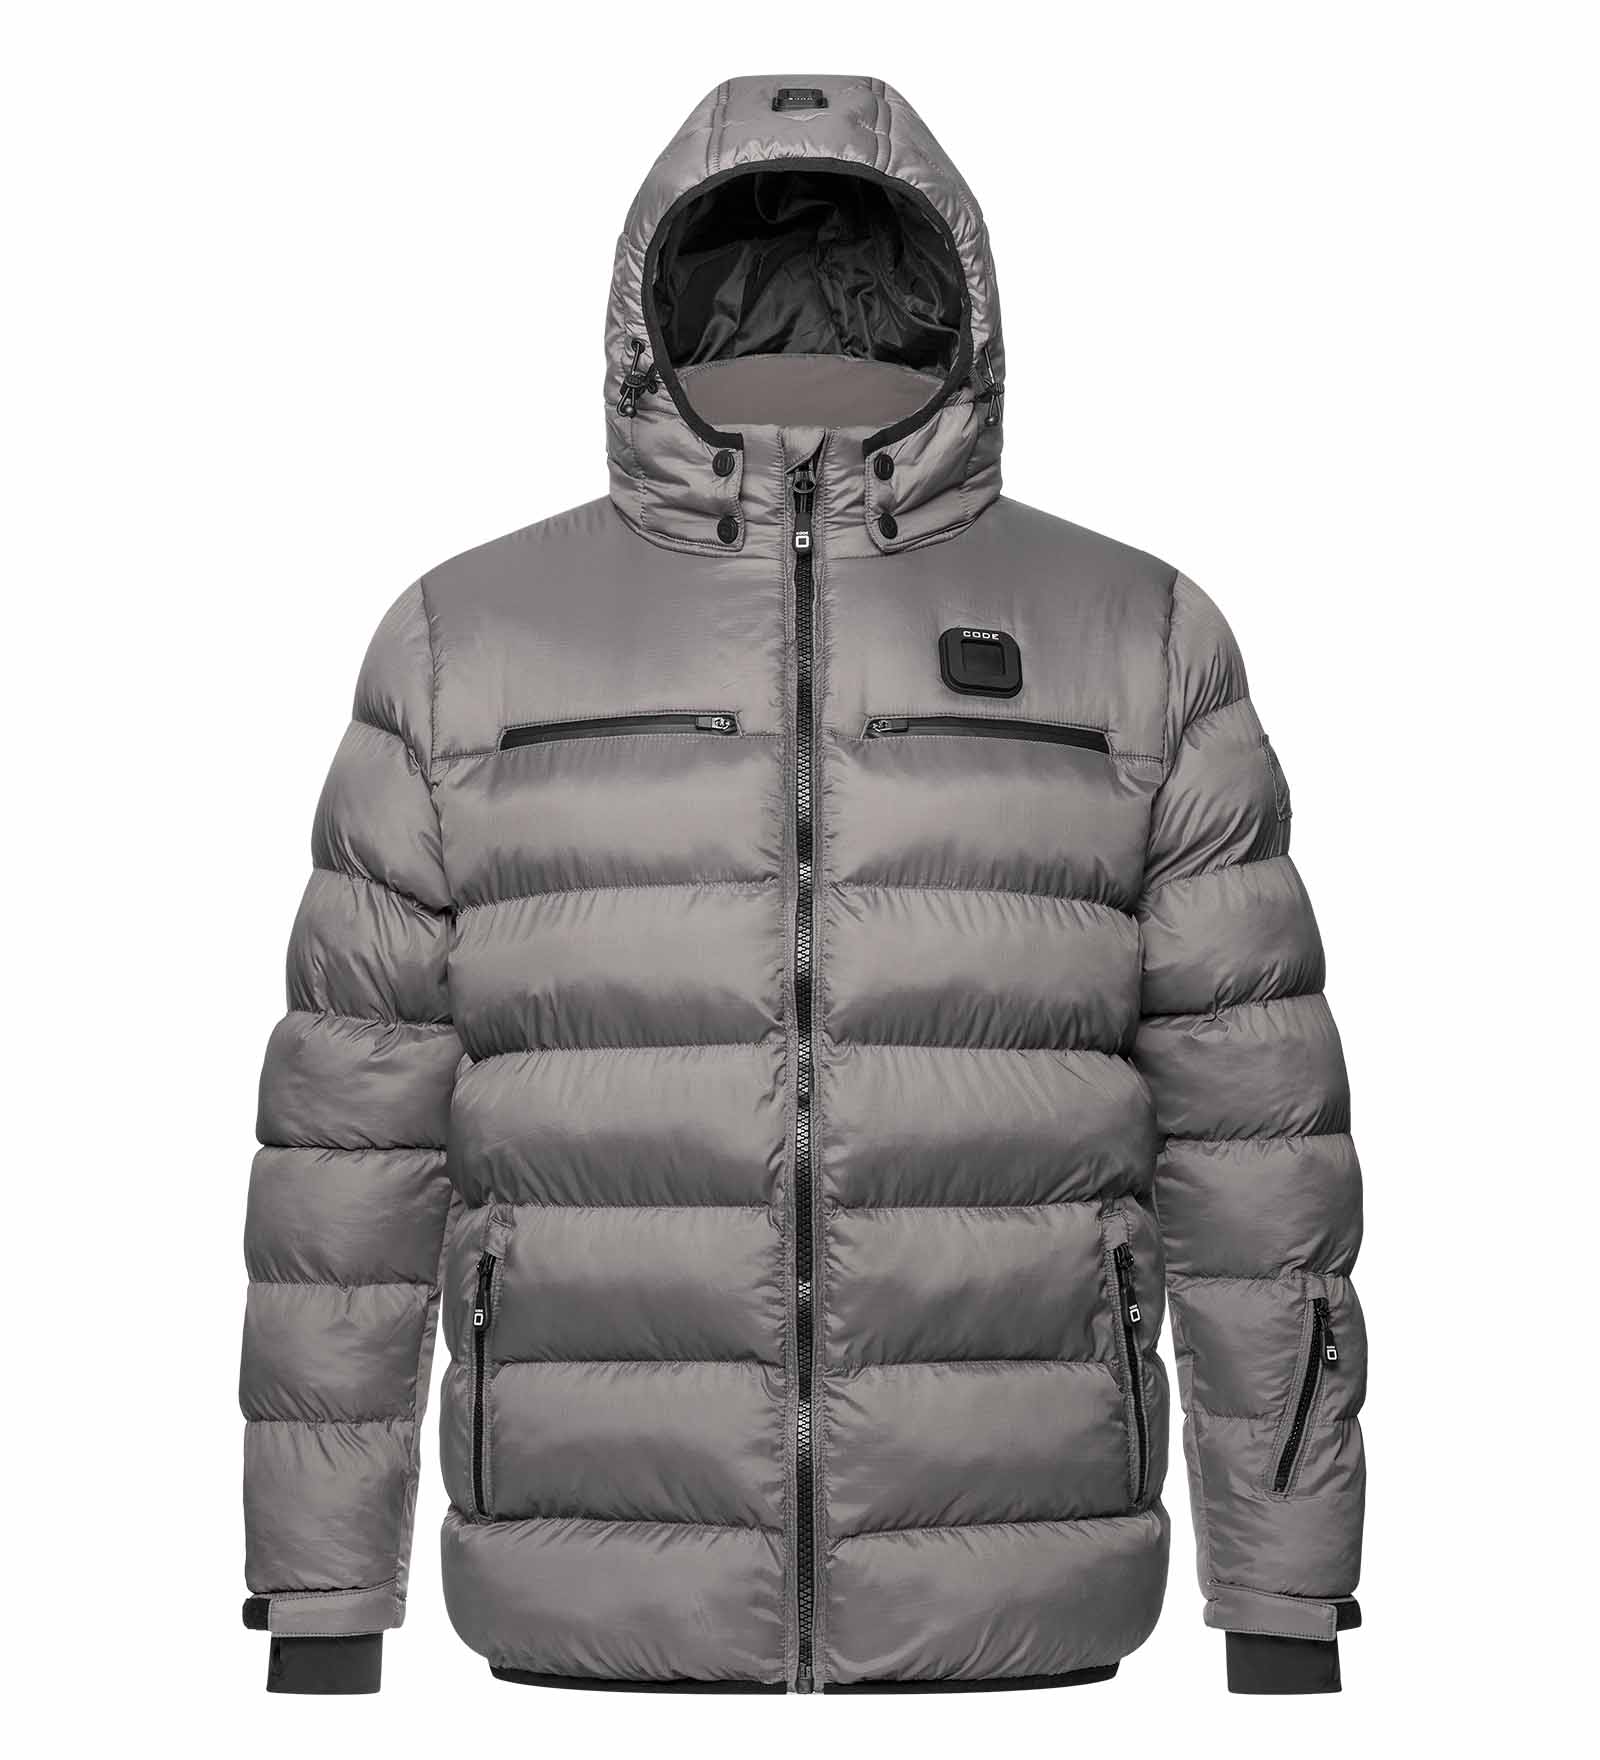 DECILRO Mens Mid-Weight Puffer Jacket with Removable Hood Shiny Hooded Reflective Down Jacket Cotton Jacket Gray Xxxl, Adult Unisex, Size: 3XL